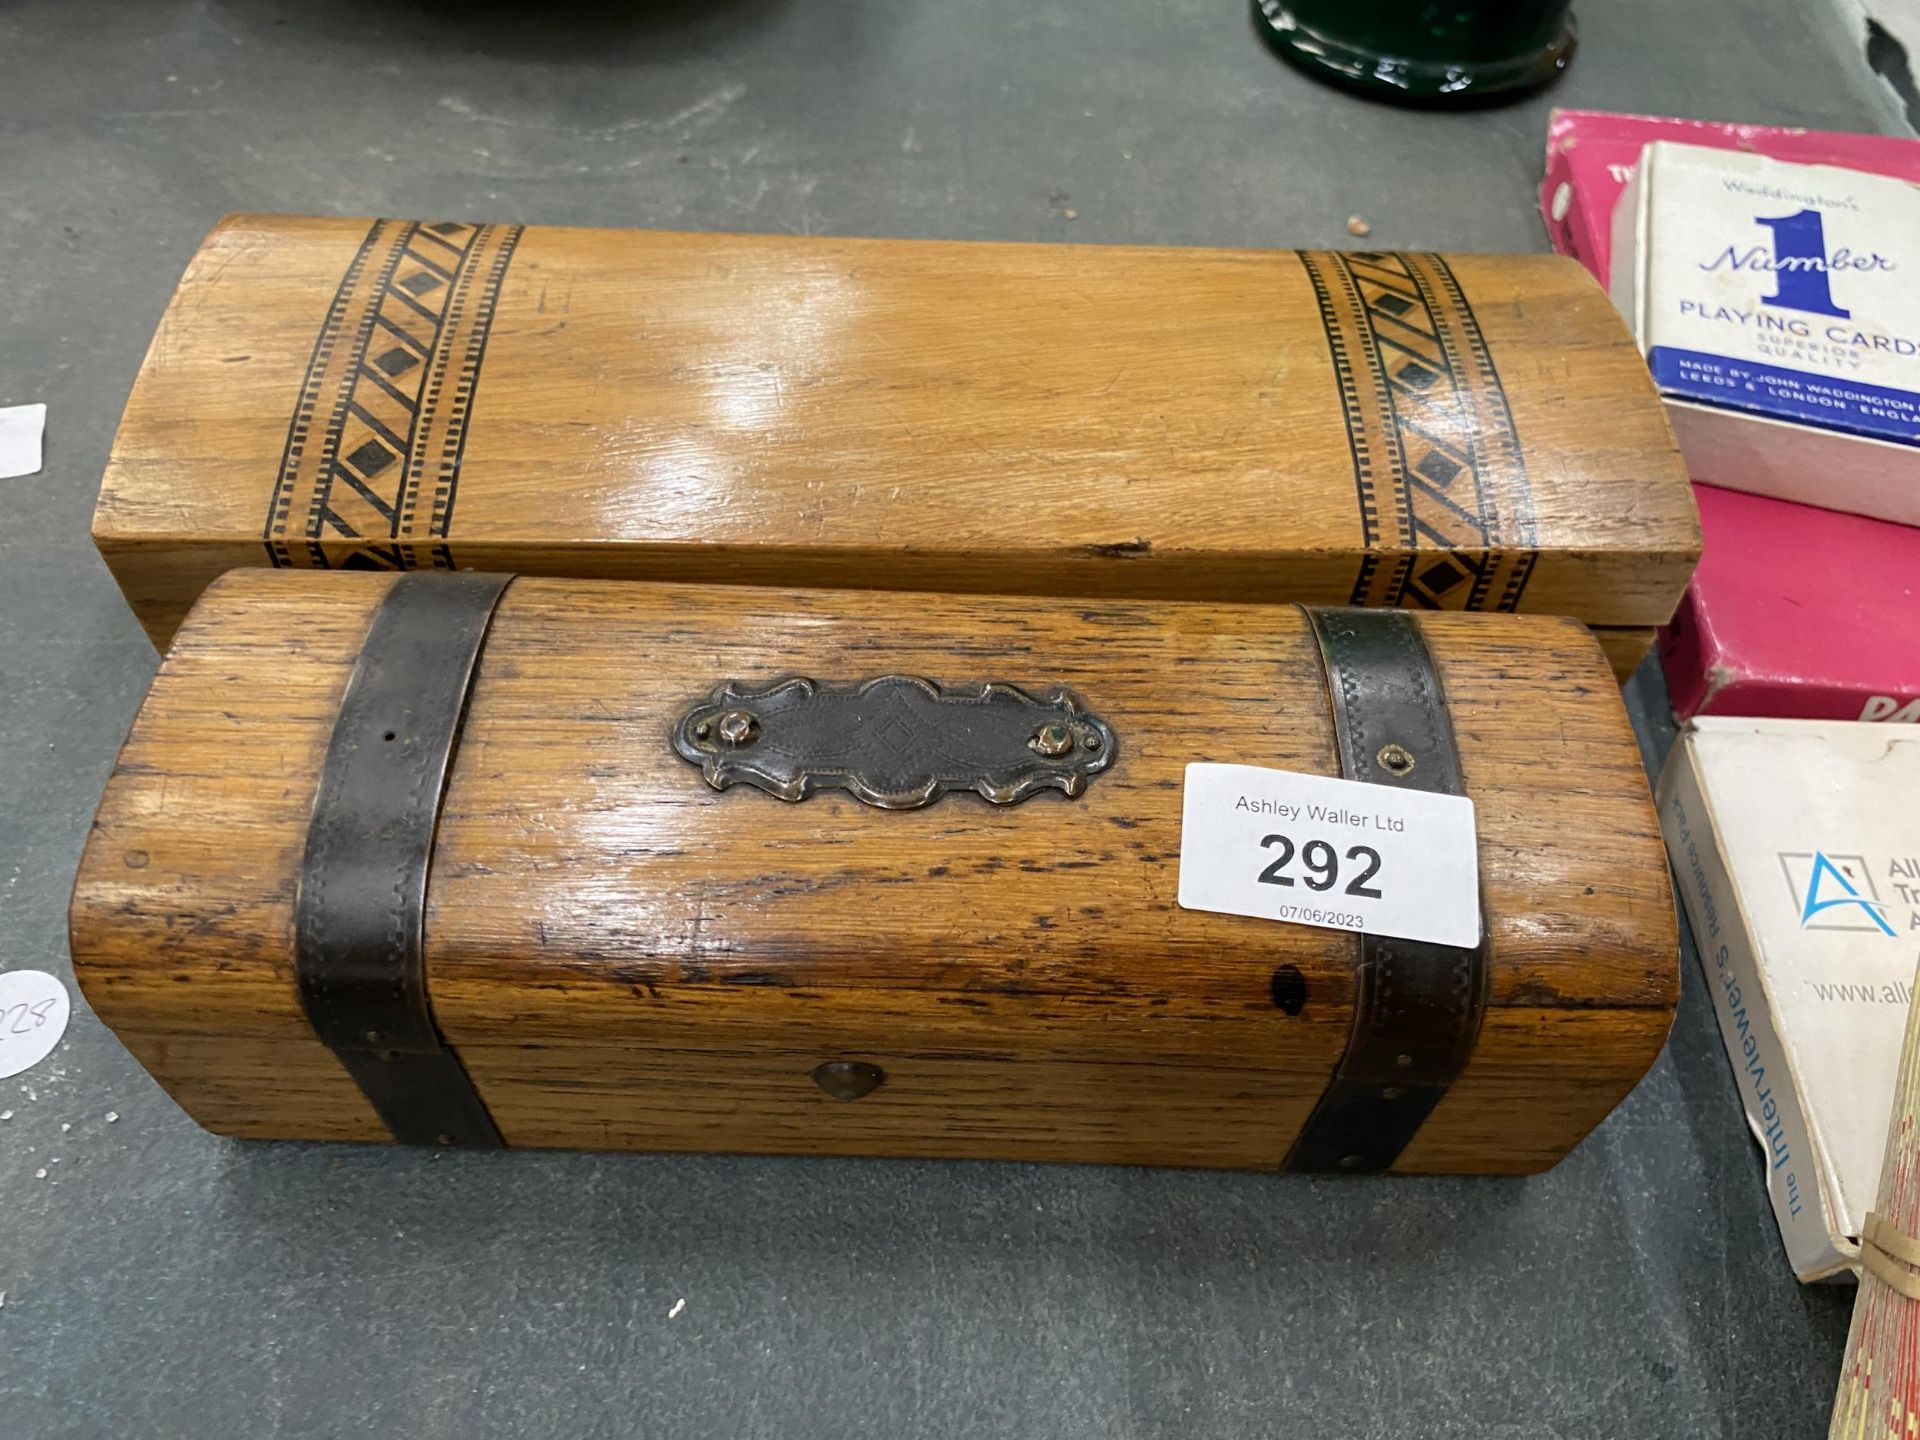 TWO VINTAGE WOODEN GLOVE BOXES - ONE INLAID AND ONE METAL BOUND